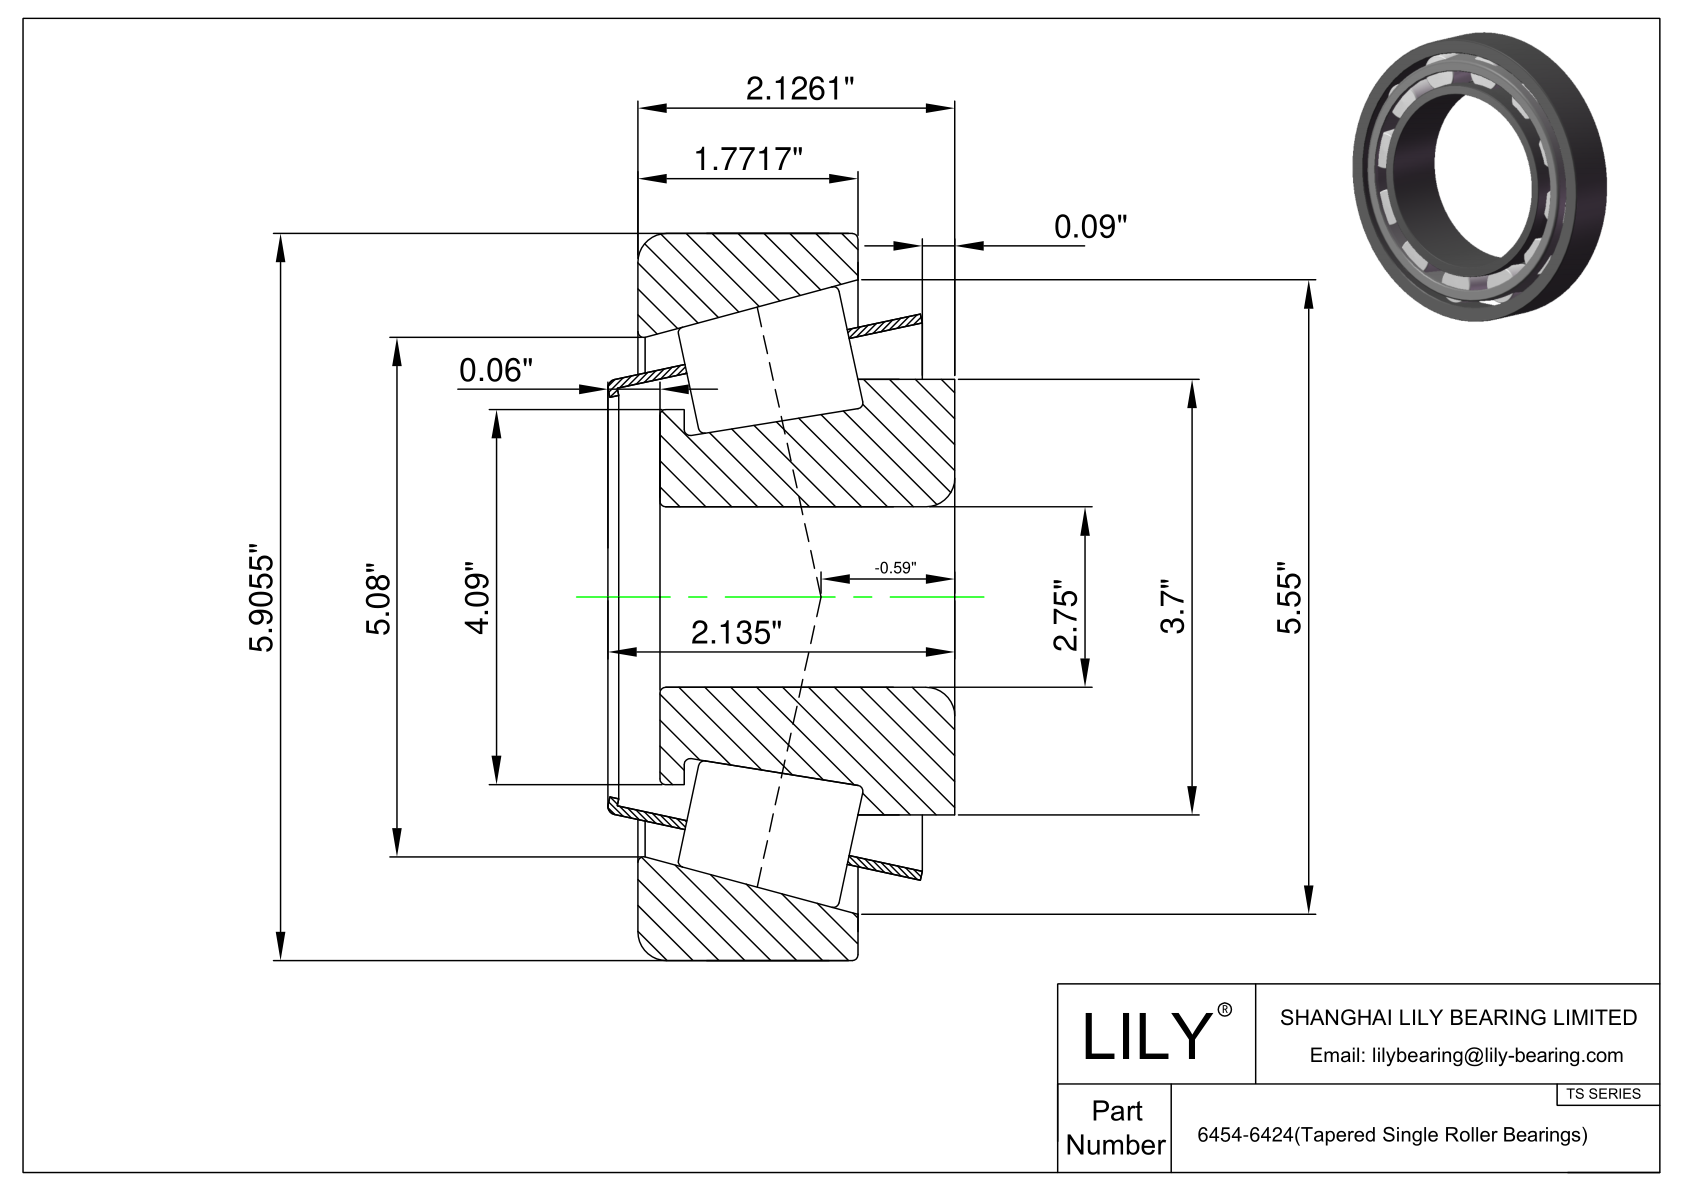 6454-6424 TS (Tapered Single Roller Bearings) (Imperial) cad drawing